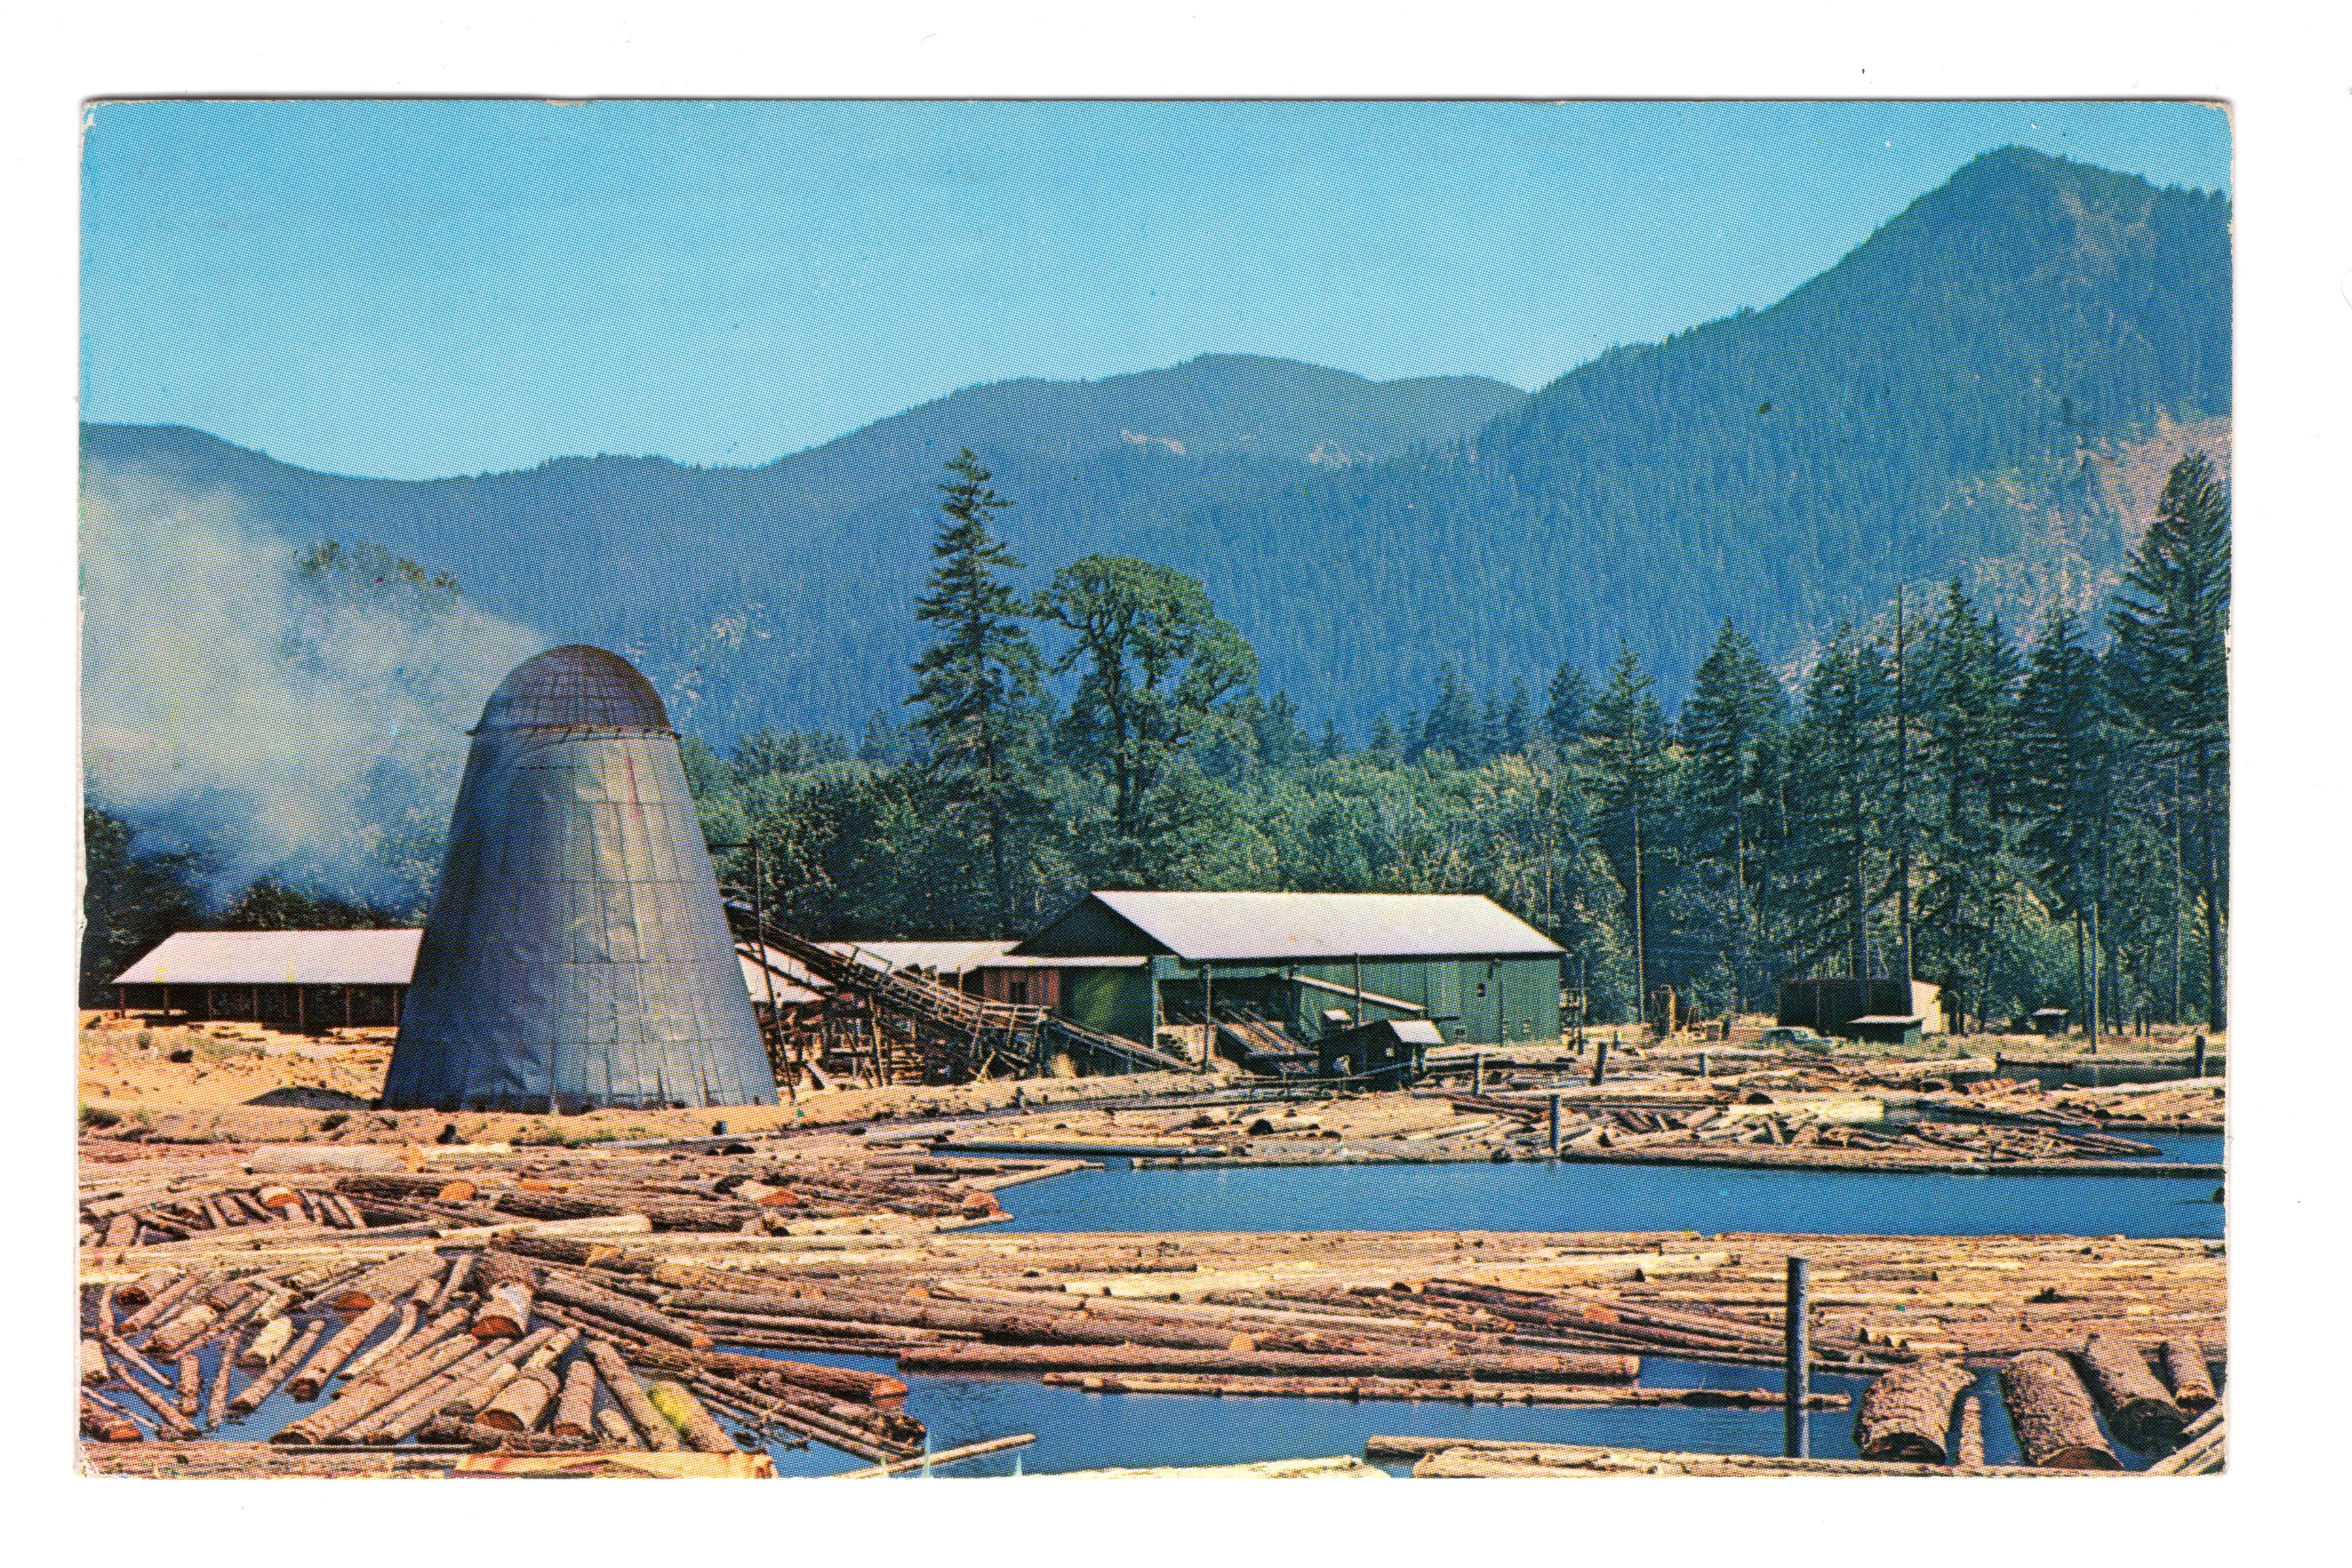 A Northwest Sawmill and Log Pong, Vintage Post Card.